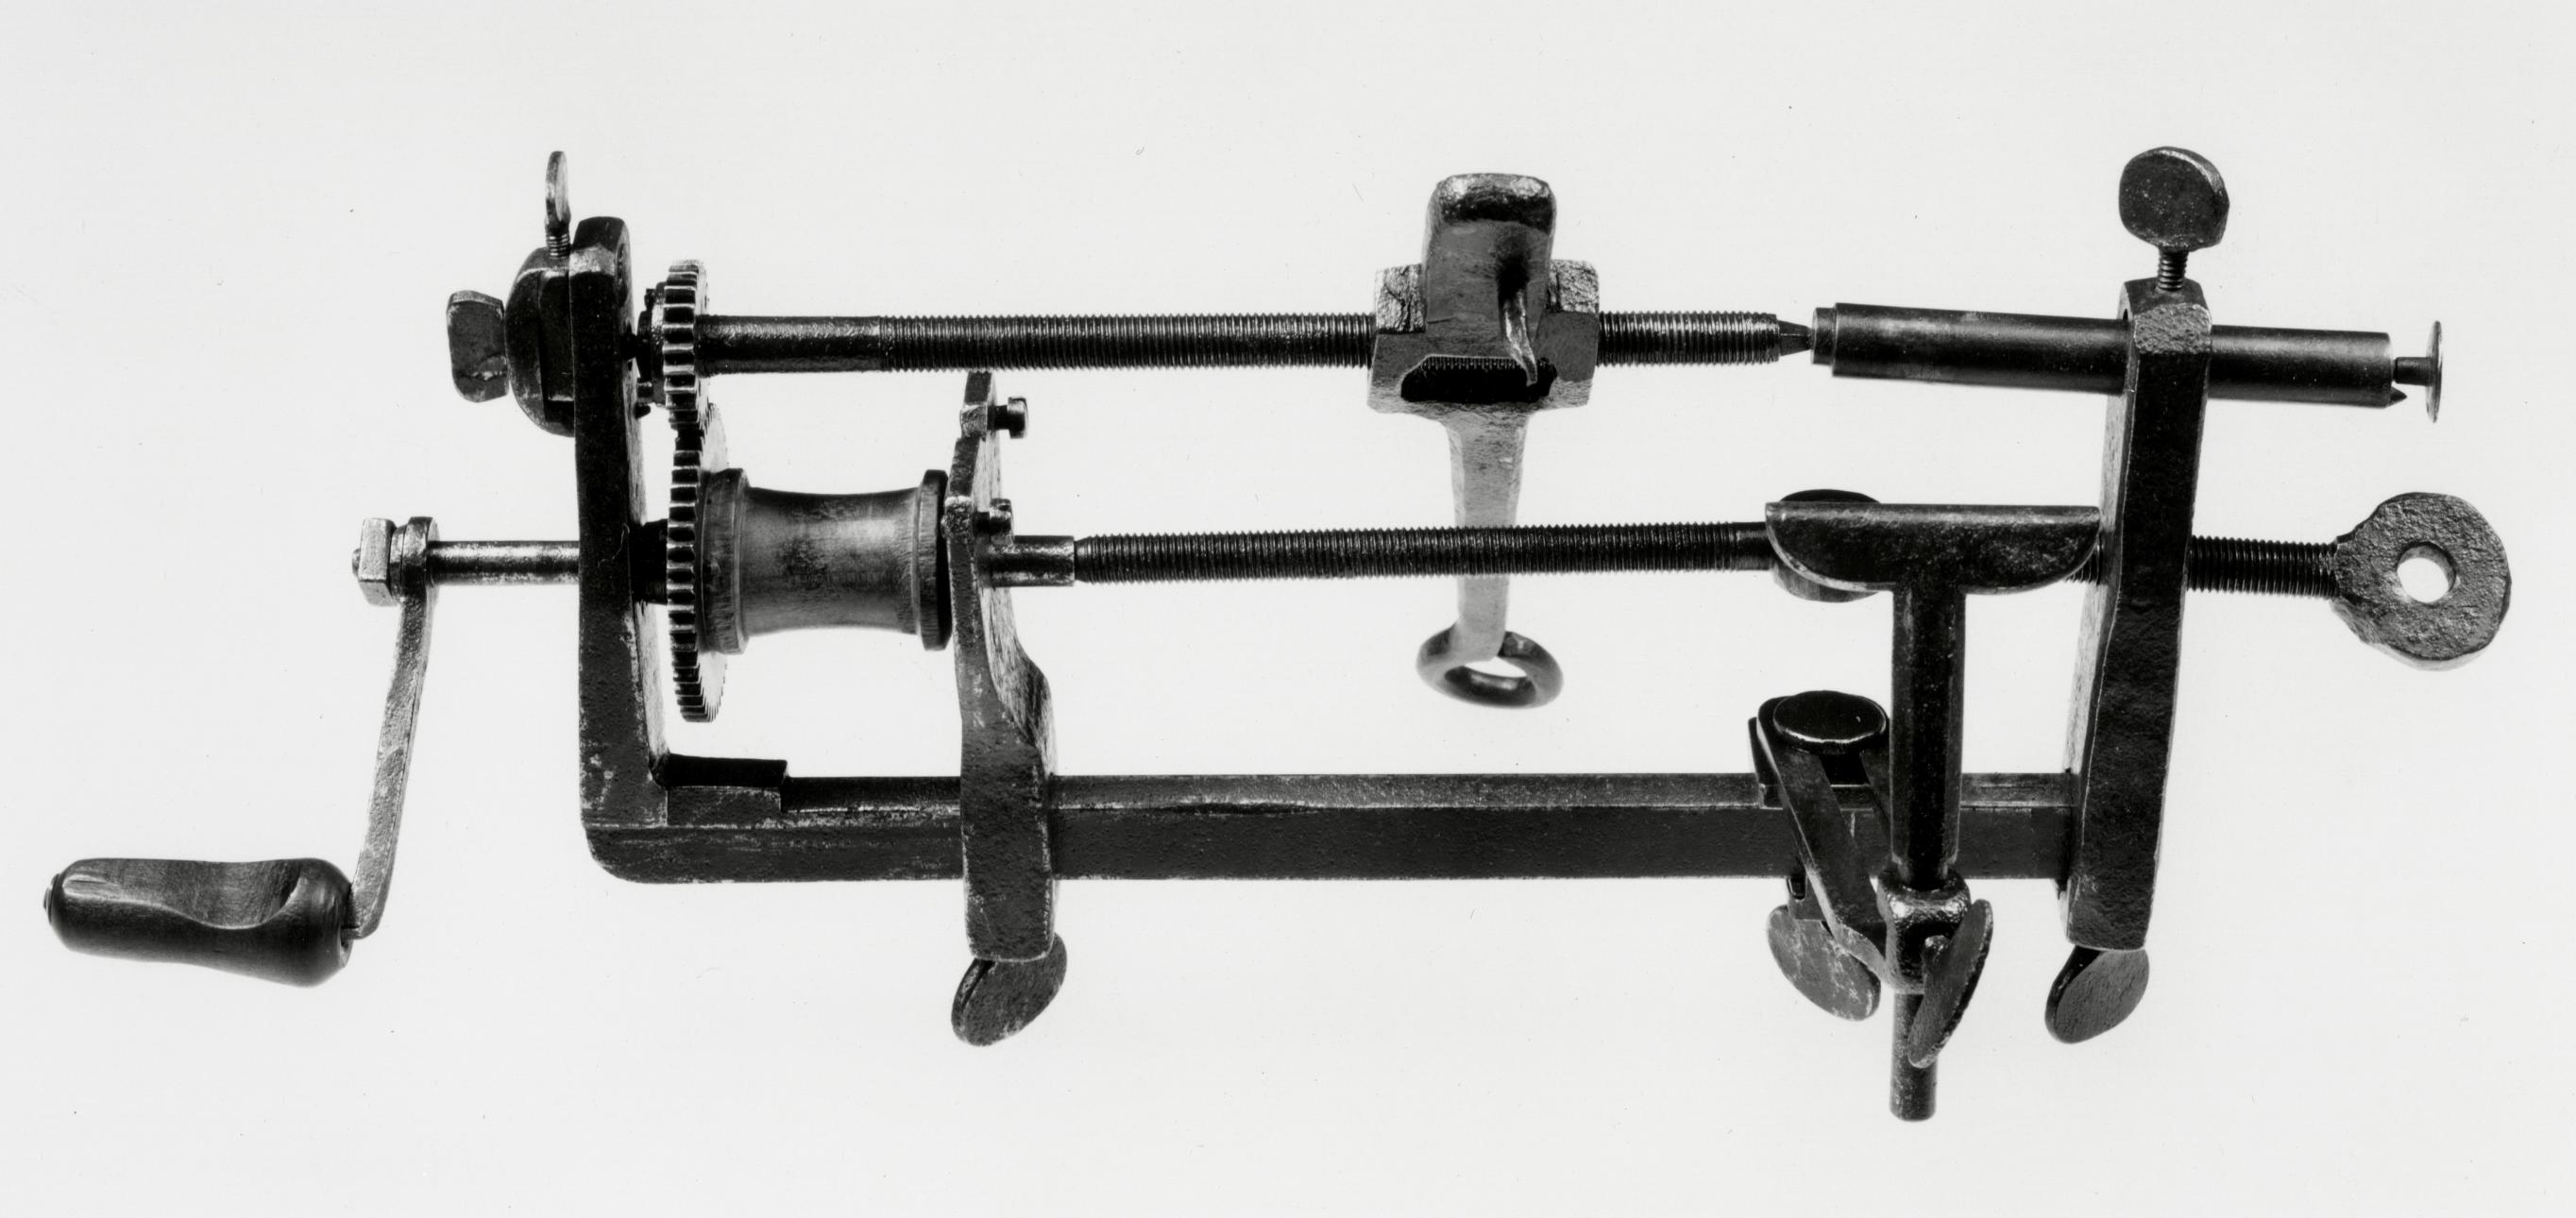 Black and white photo of a clock-barrel and screw-threads cutter (fusee engine).